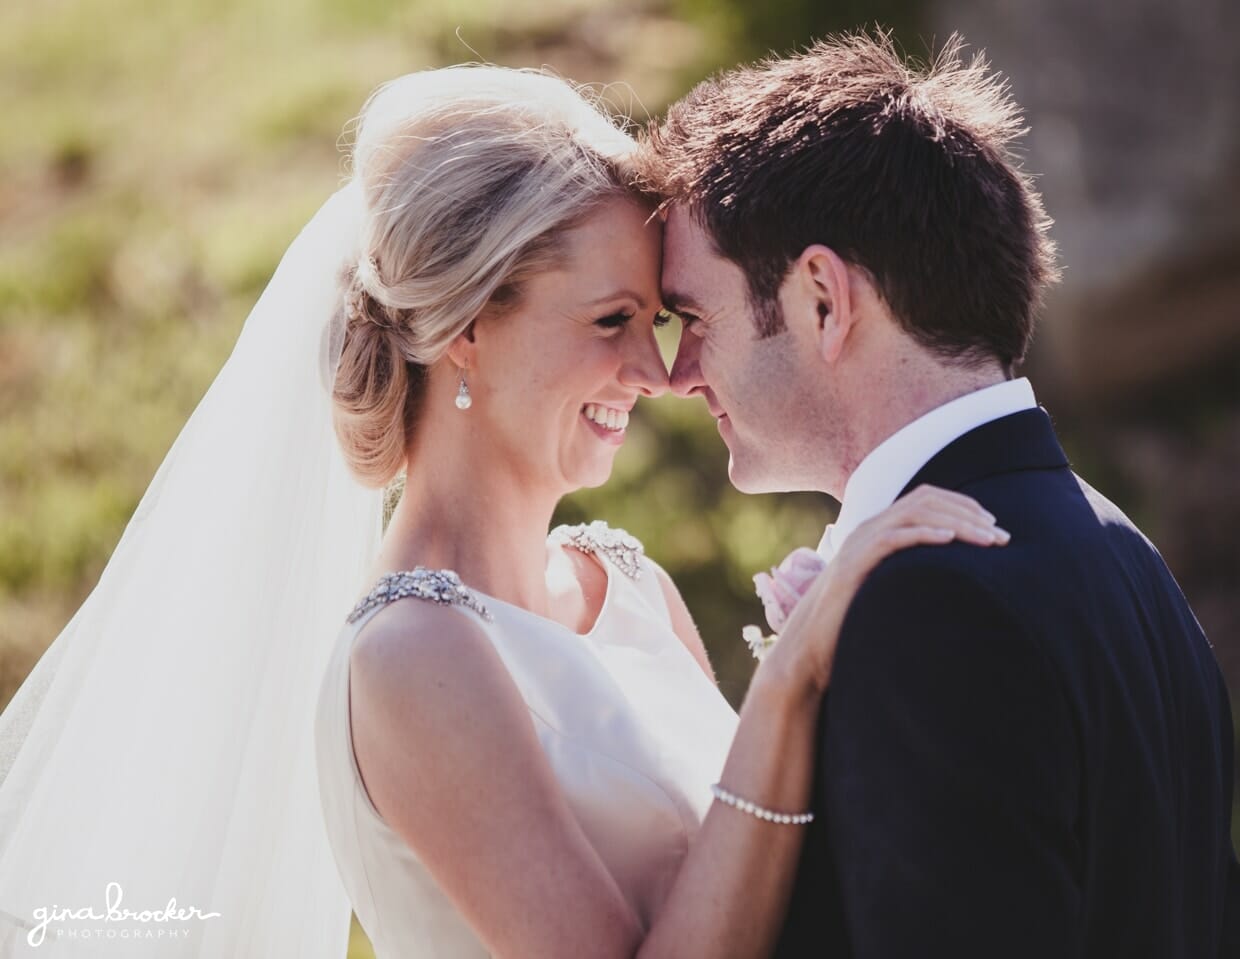 A cute portrait of a bride and groom touching noses during their garden inspired wedding in Massachusetts